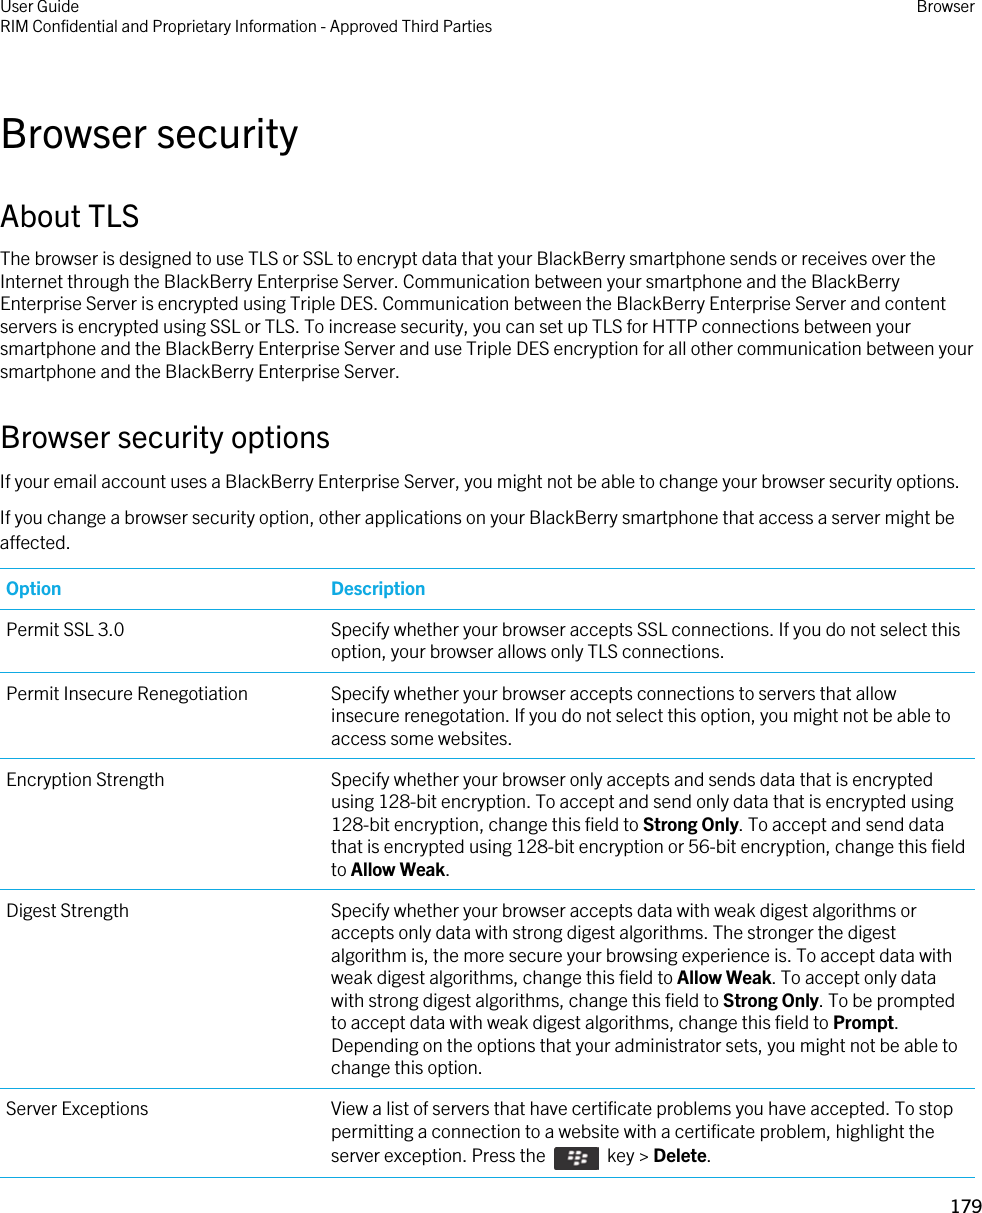 Browser securityAbout TLSThe browser is designed to use TLS or SSL to encrypt data that your BlackBerry smartphone sends or receives over the Internet through the BlackBerry Enterprise Server. Communication between your smartphone and the BlackBerry Enterprise Server is encrypted using Triple DES. Communication between the BlackBerry Enterprise Server and content servers is encrypted using SSL or TLS. To increase security, you can set up TLS for HTTP connections between your smartphone and the BlackBerry Enterprise Server and use Triple DES encryption for all other communication between your smartphone and the BlackBerry Enterprise Server.Browser security optionsIf your email account uses a BlackBerry Enterprise Server, you might not be able to change your browser security options.If you change a browser security option, other applications on your BlackBerry smartphone that access a server might be affected.Option DescriptionPermit SSL 3.0 Specify whether your browser accepts SSL connections. If you do not select this option, your browser allows only TLS connections.Permit Insecure Renegotiation Specify whether your browser accepts connections to servers that allow insecure renegotation. If you do not select this option, you might not be able to access some websites.Encryption Strength Specify whether your browser only accepts and sends data that is encrypted using 128-bit encryption. To accept and send only data that is encrypted using 128-bit encryption, change this field to Strong Only. To accept and send data that is encrypted using 128-bit encryption or 56-bit encryption, change this field to Allow Weak.Digest Strength Specify whether your browser accepts data with weak digest algorithms or accepts only data with strong digest algorithms. The stronger the digest algorithm is, the more secure your browsing experience is. To accept data with weak digest algorithms, change this field to Allow Weak. To accept only data with strong digest algorithms, change this field to Strong Only. To be prompted to accept data with weak digest algorithms, change this field to Prompt. Depending on the options that your administrator sets, you might not be able to change this option.Server Exceptions View a list of servers that have certificate problems you have accepted. To stop permitting a connection to a website with a certificate problem, highlight the server exception. Press the    key &gt; Delete.User GuideRIM Confidential and Proprietary Information - Approved Third Parties Browser179 